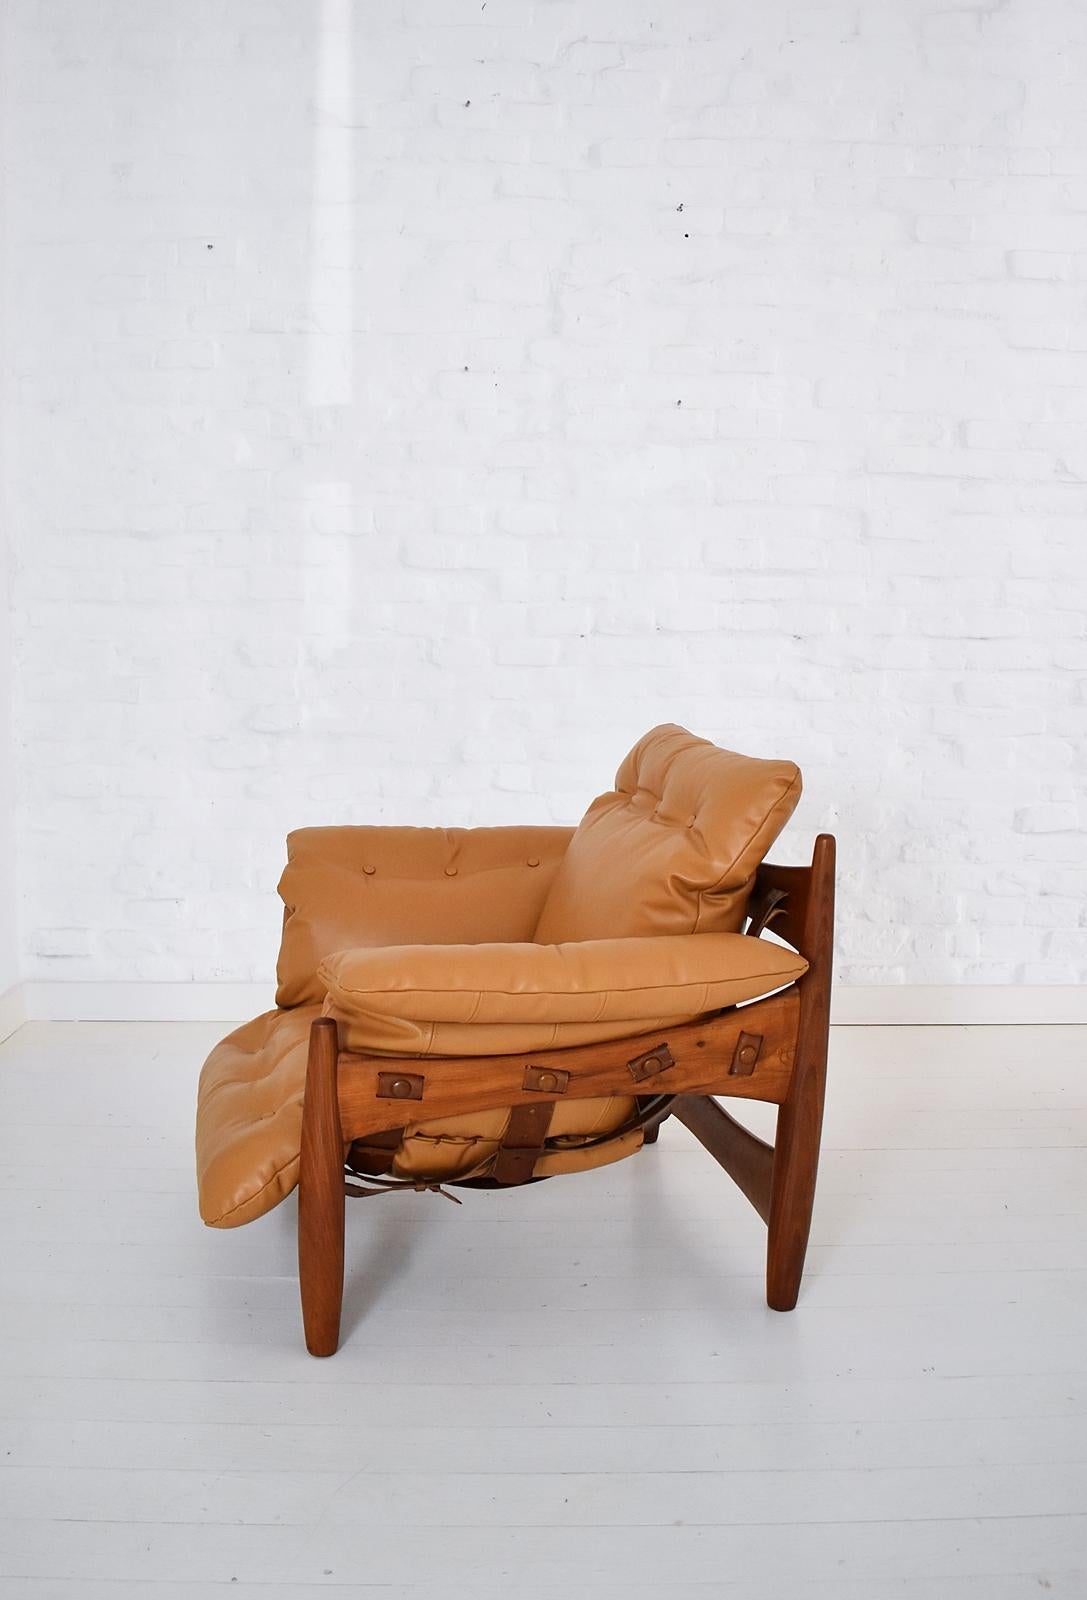 Sheriff armchair by Sergio Rodrigues. Originally nick-named the POLTRONA MOLE or soft chair due to its decidedly relaxed style and large loose cushion, it later became known as the Sheriff chair, the leather cushion supported by leather strap and